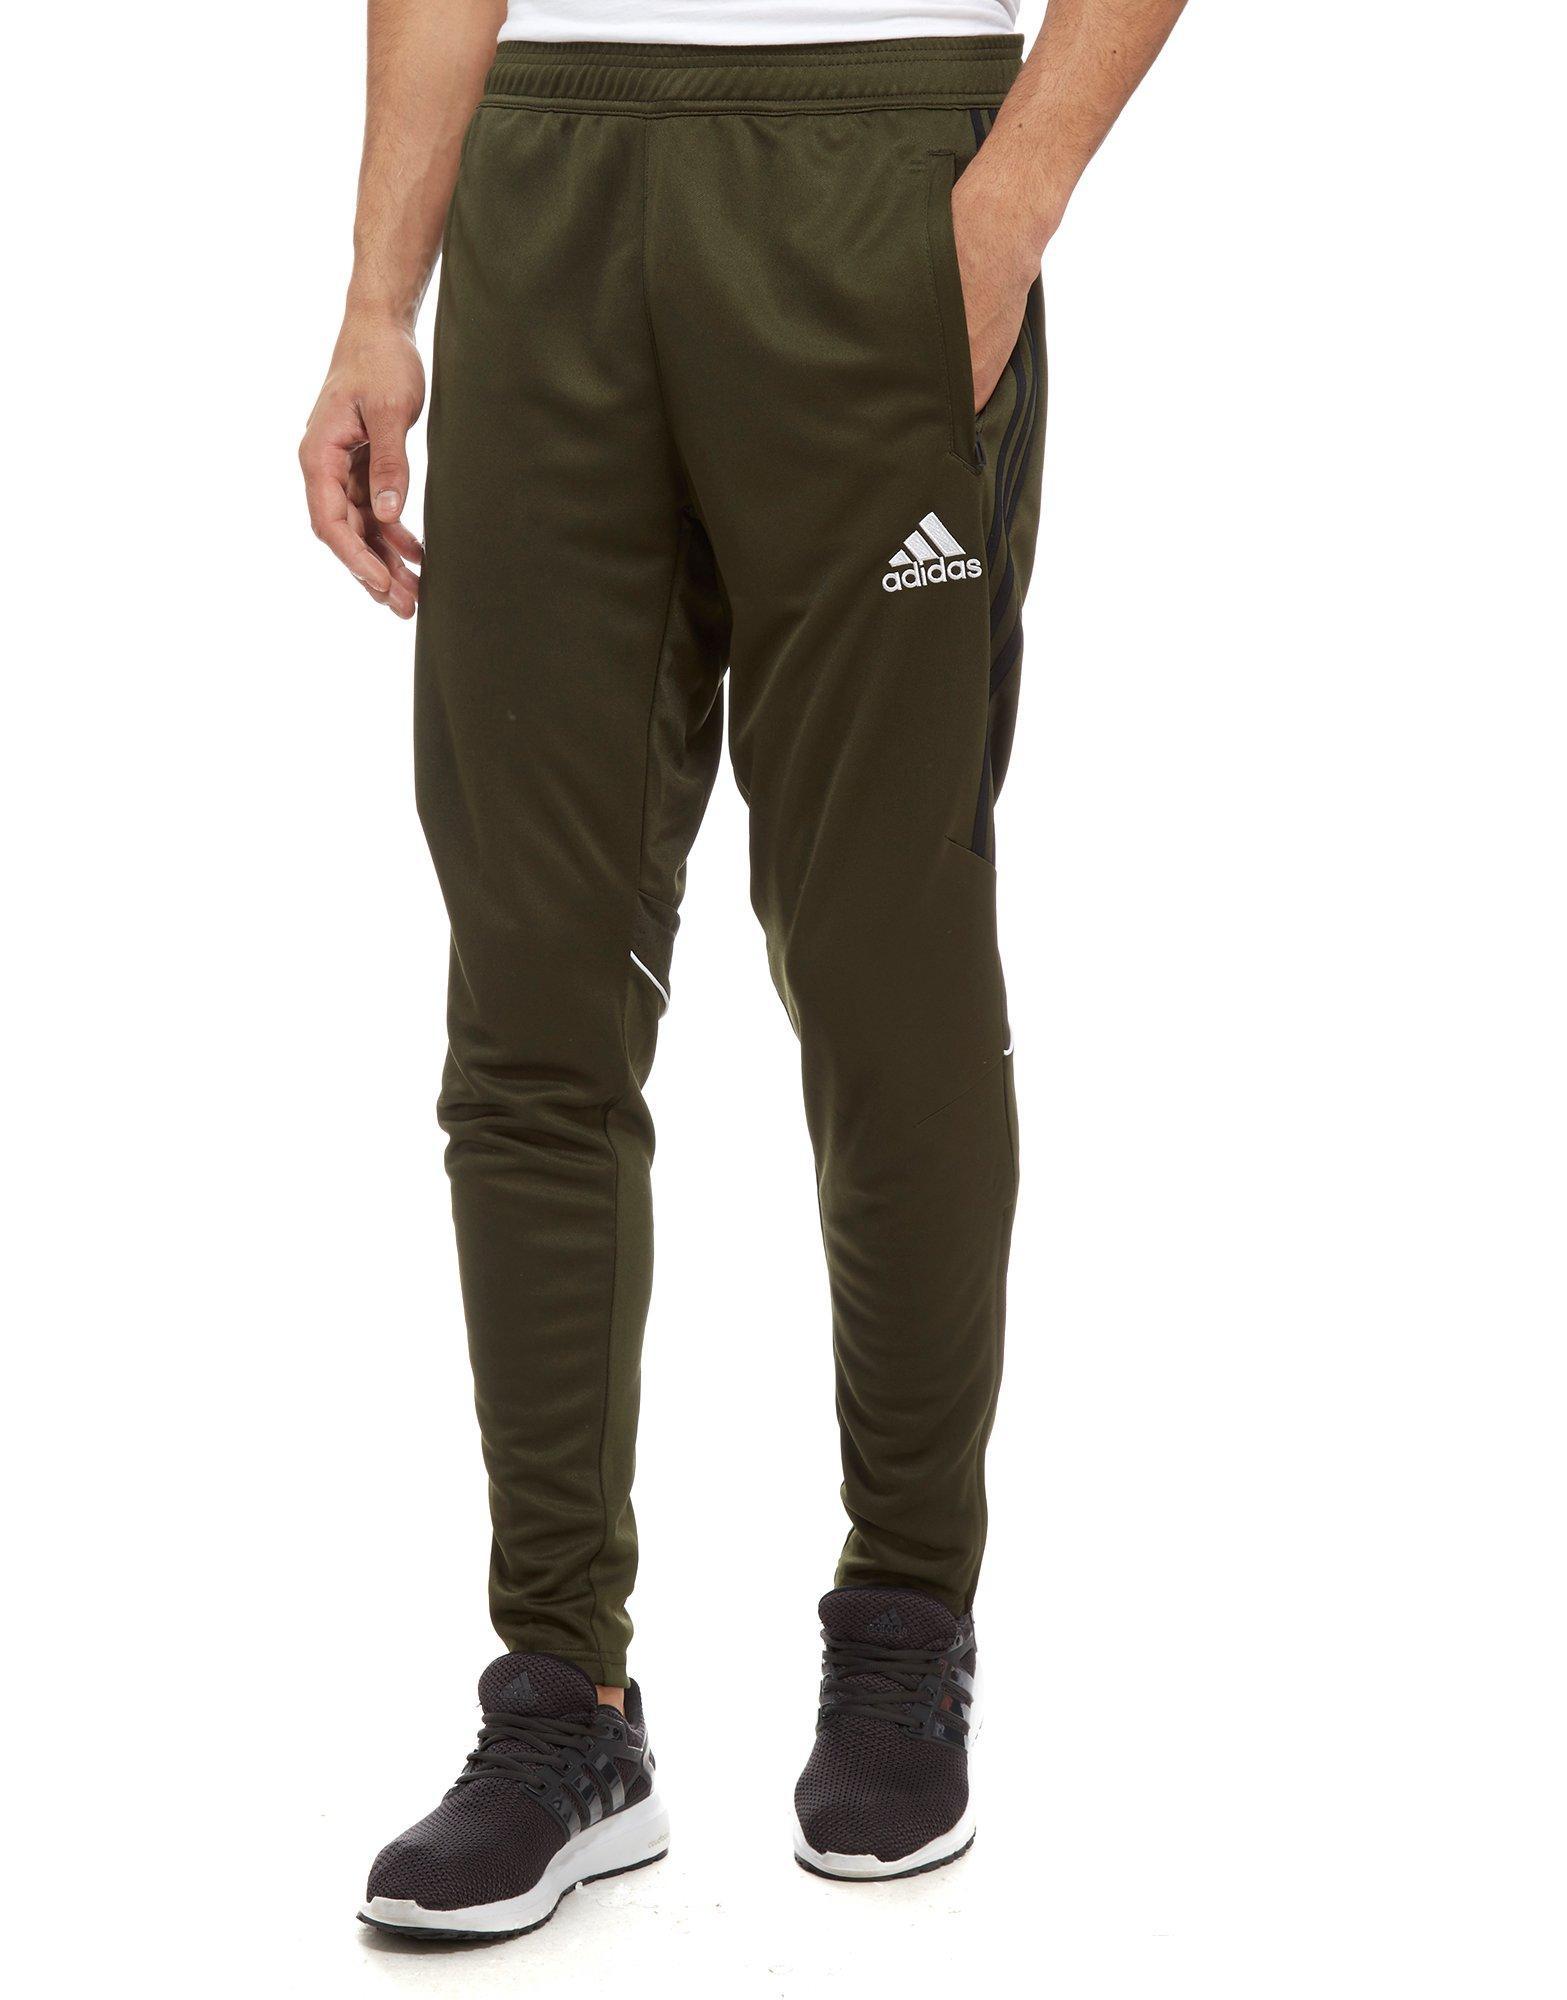 Adidas Tango Pants Green Online, SAVE 53% - aveclumiere.com